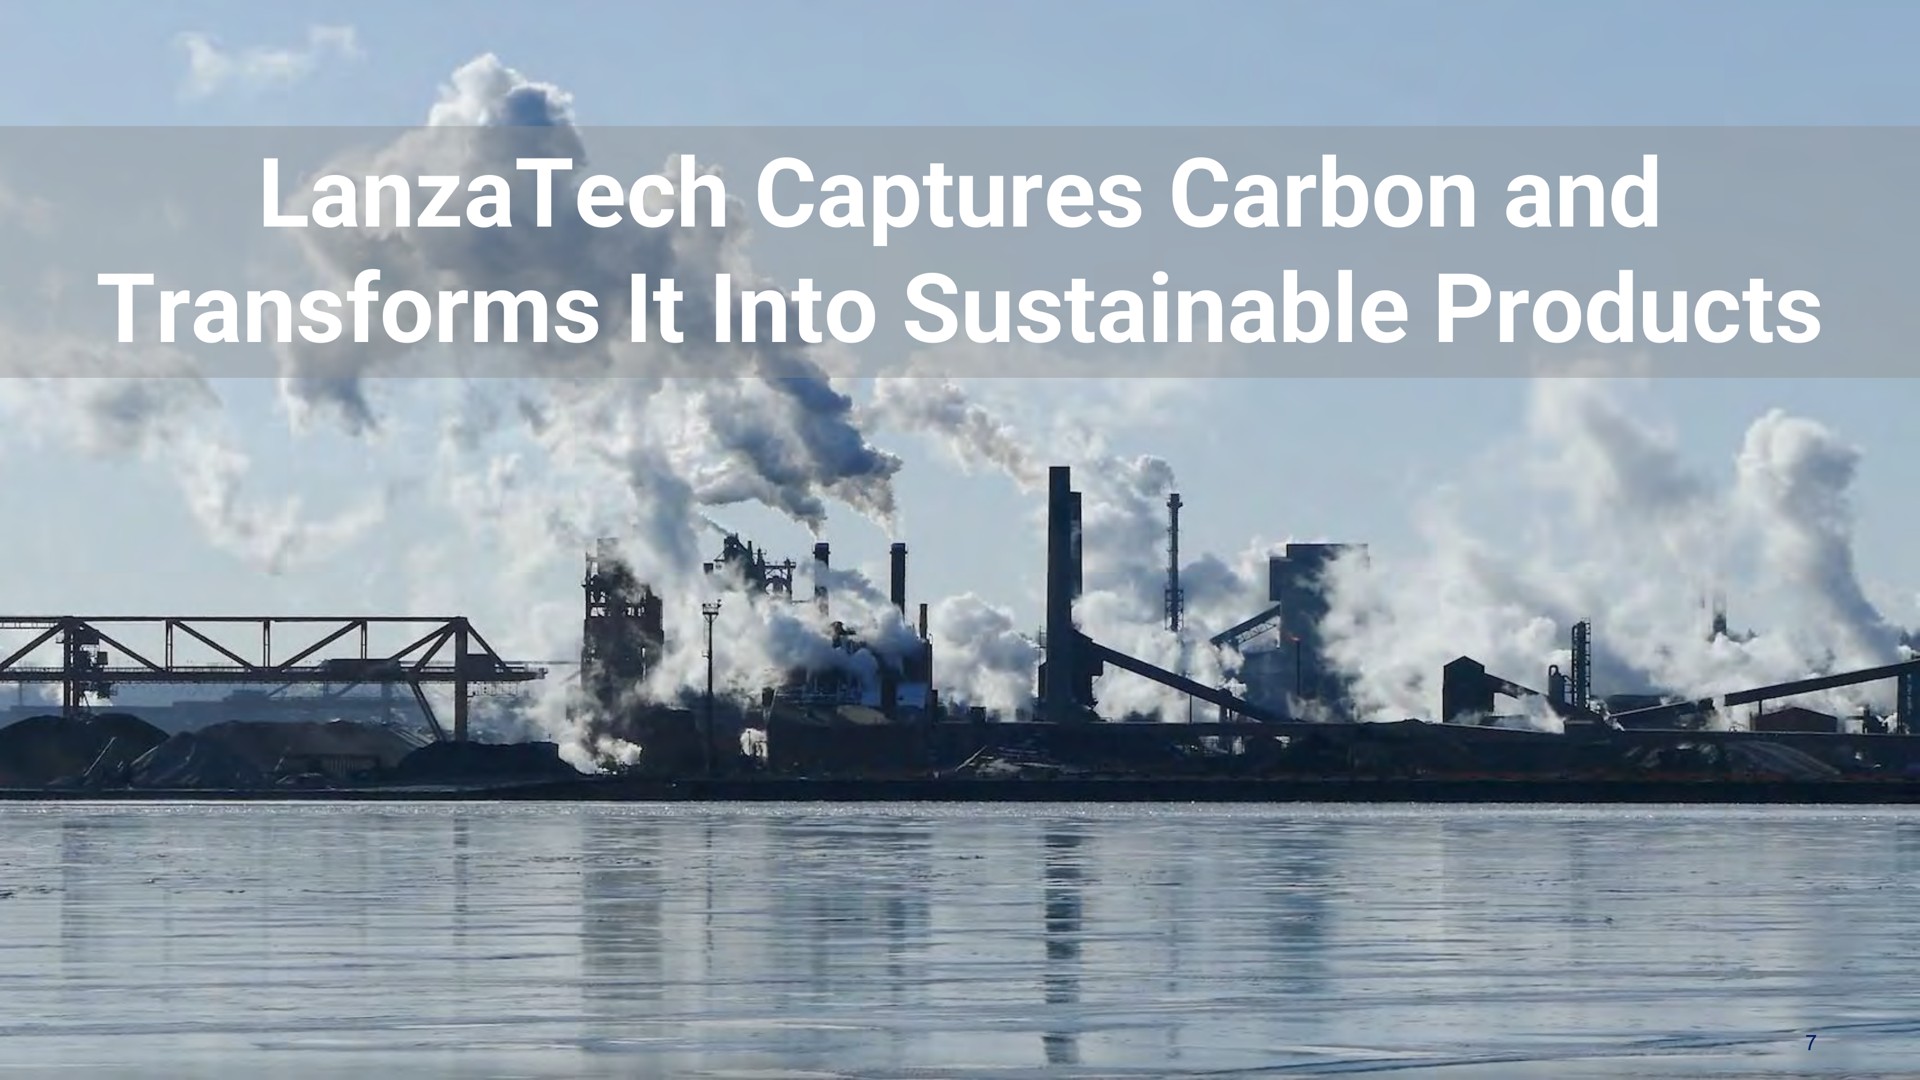 captures carbon and transforms it into sustainable products lie | LanzaTech